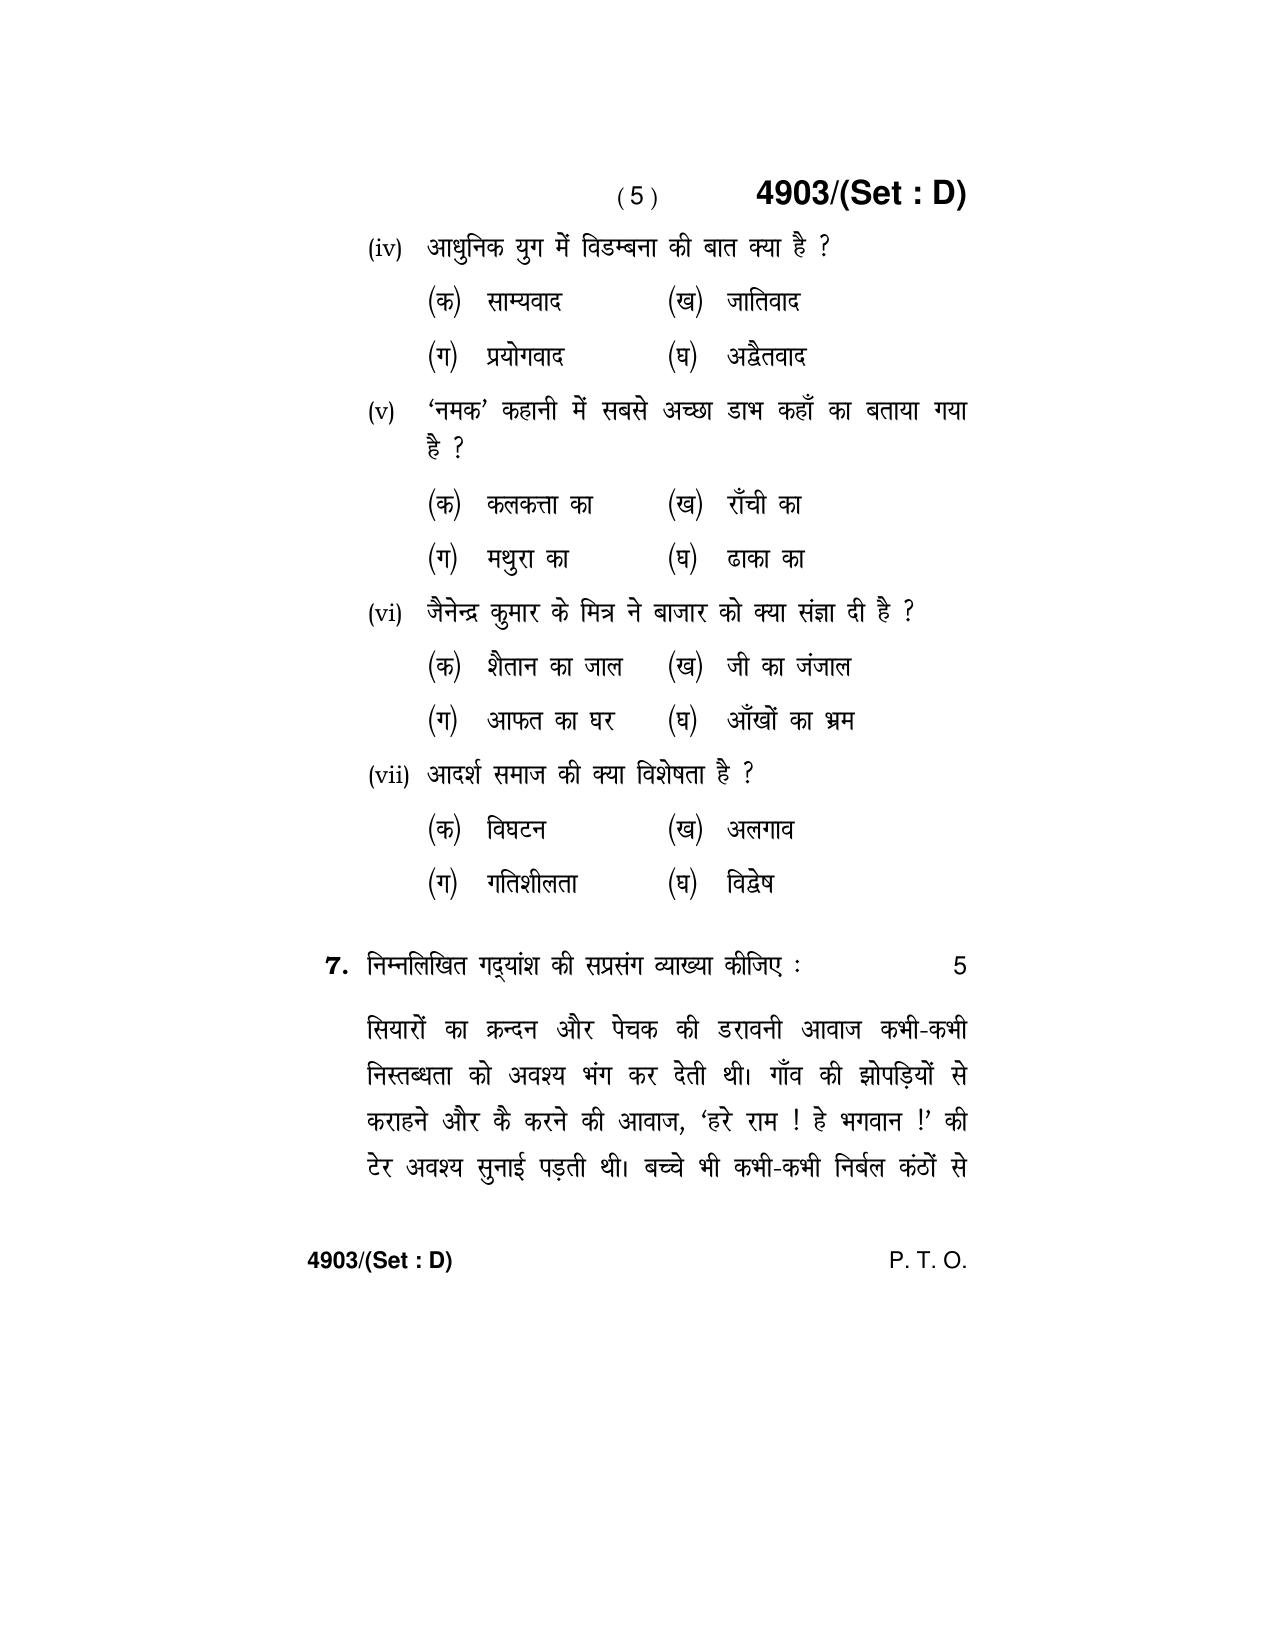 Haryana Board HBSE Class 12 Hindi Core 2020 Question Paper - Page 29